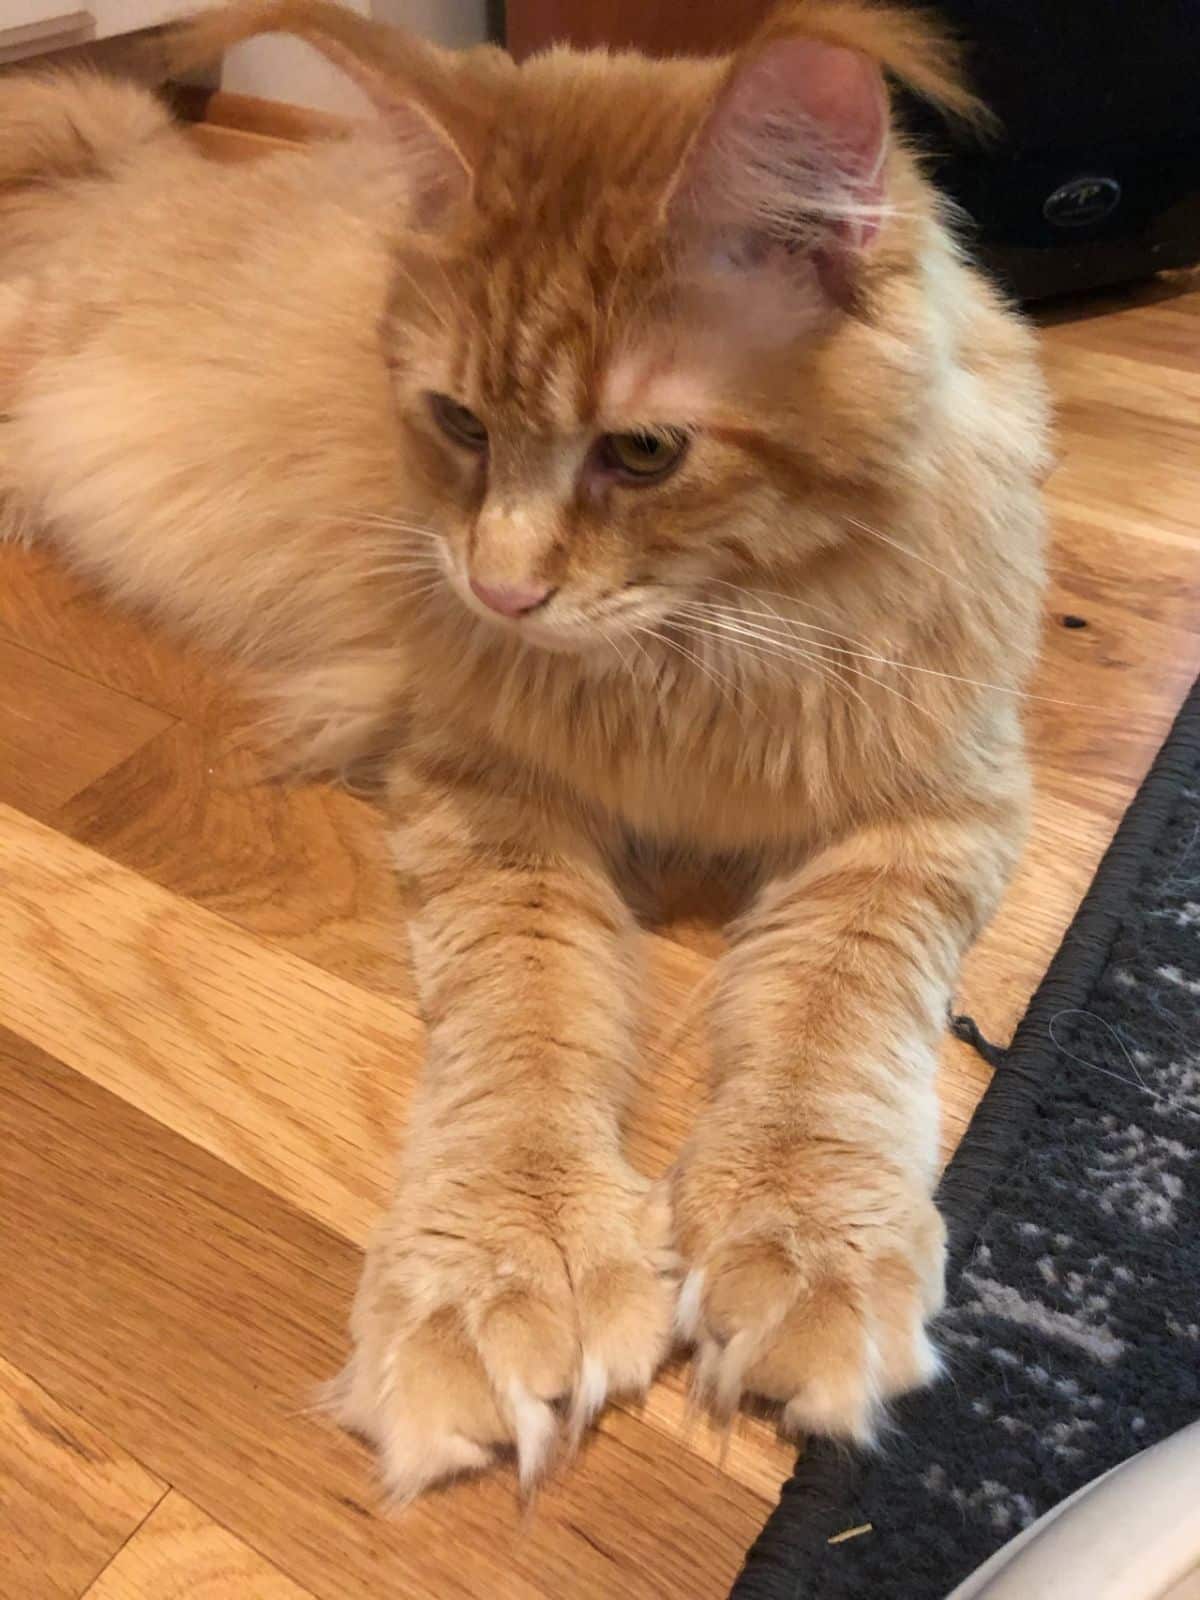 A ginger maine coon with big paws lying on a floor.